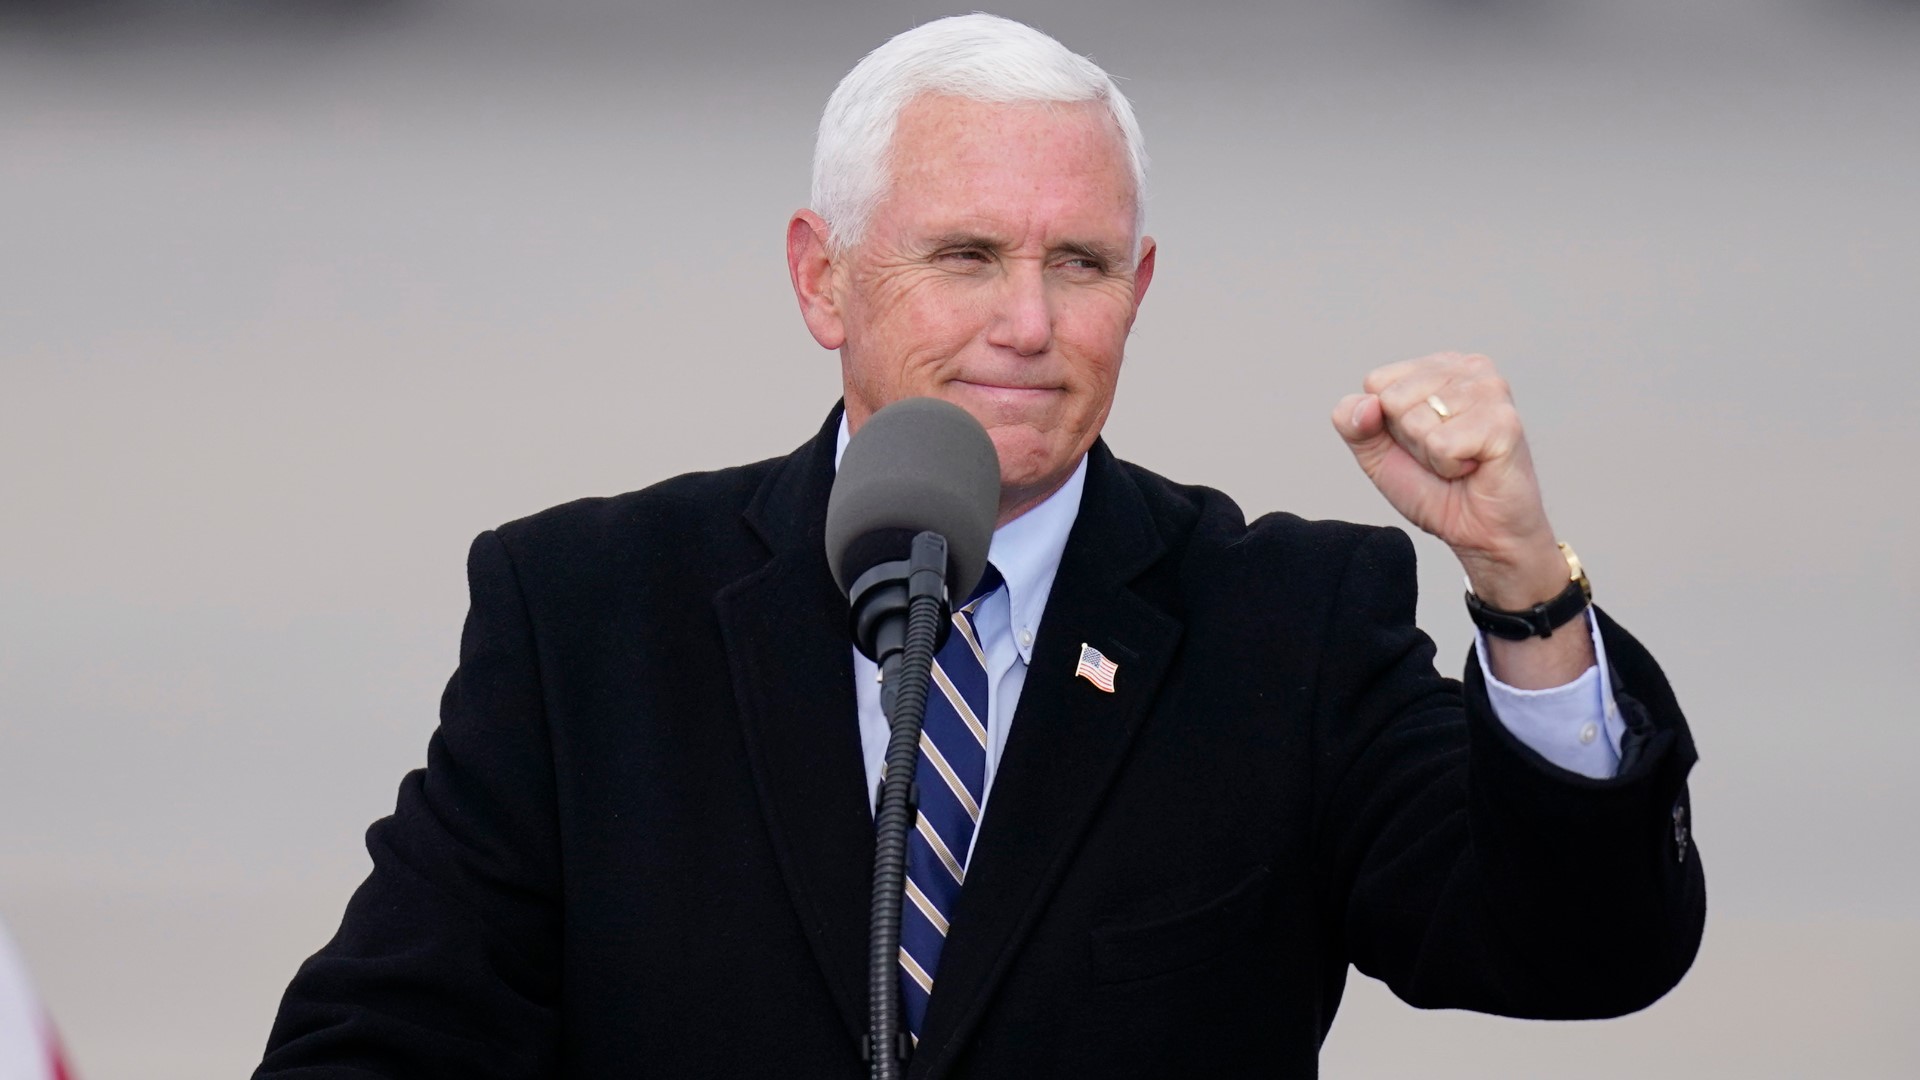 Former Vice President Mike Pence has added another top to his next visit to Iowa, this time in West Des Moines.